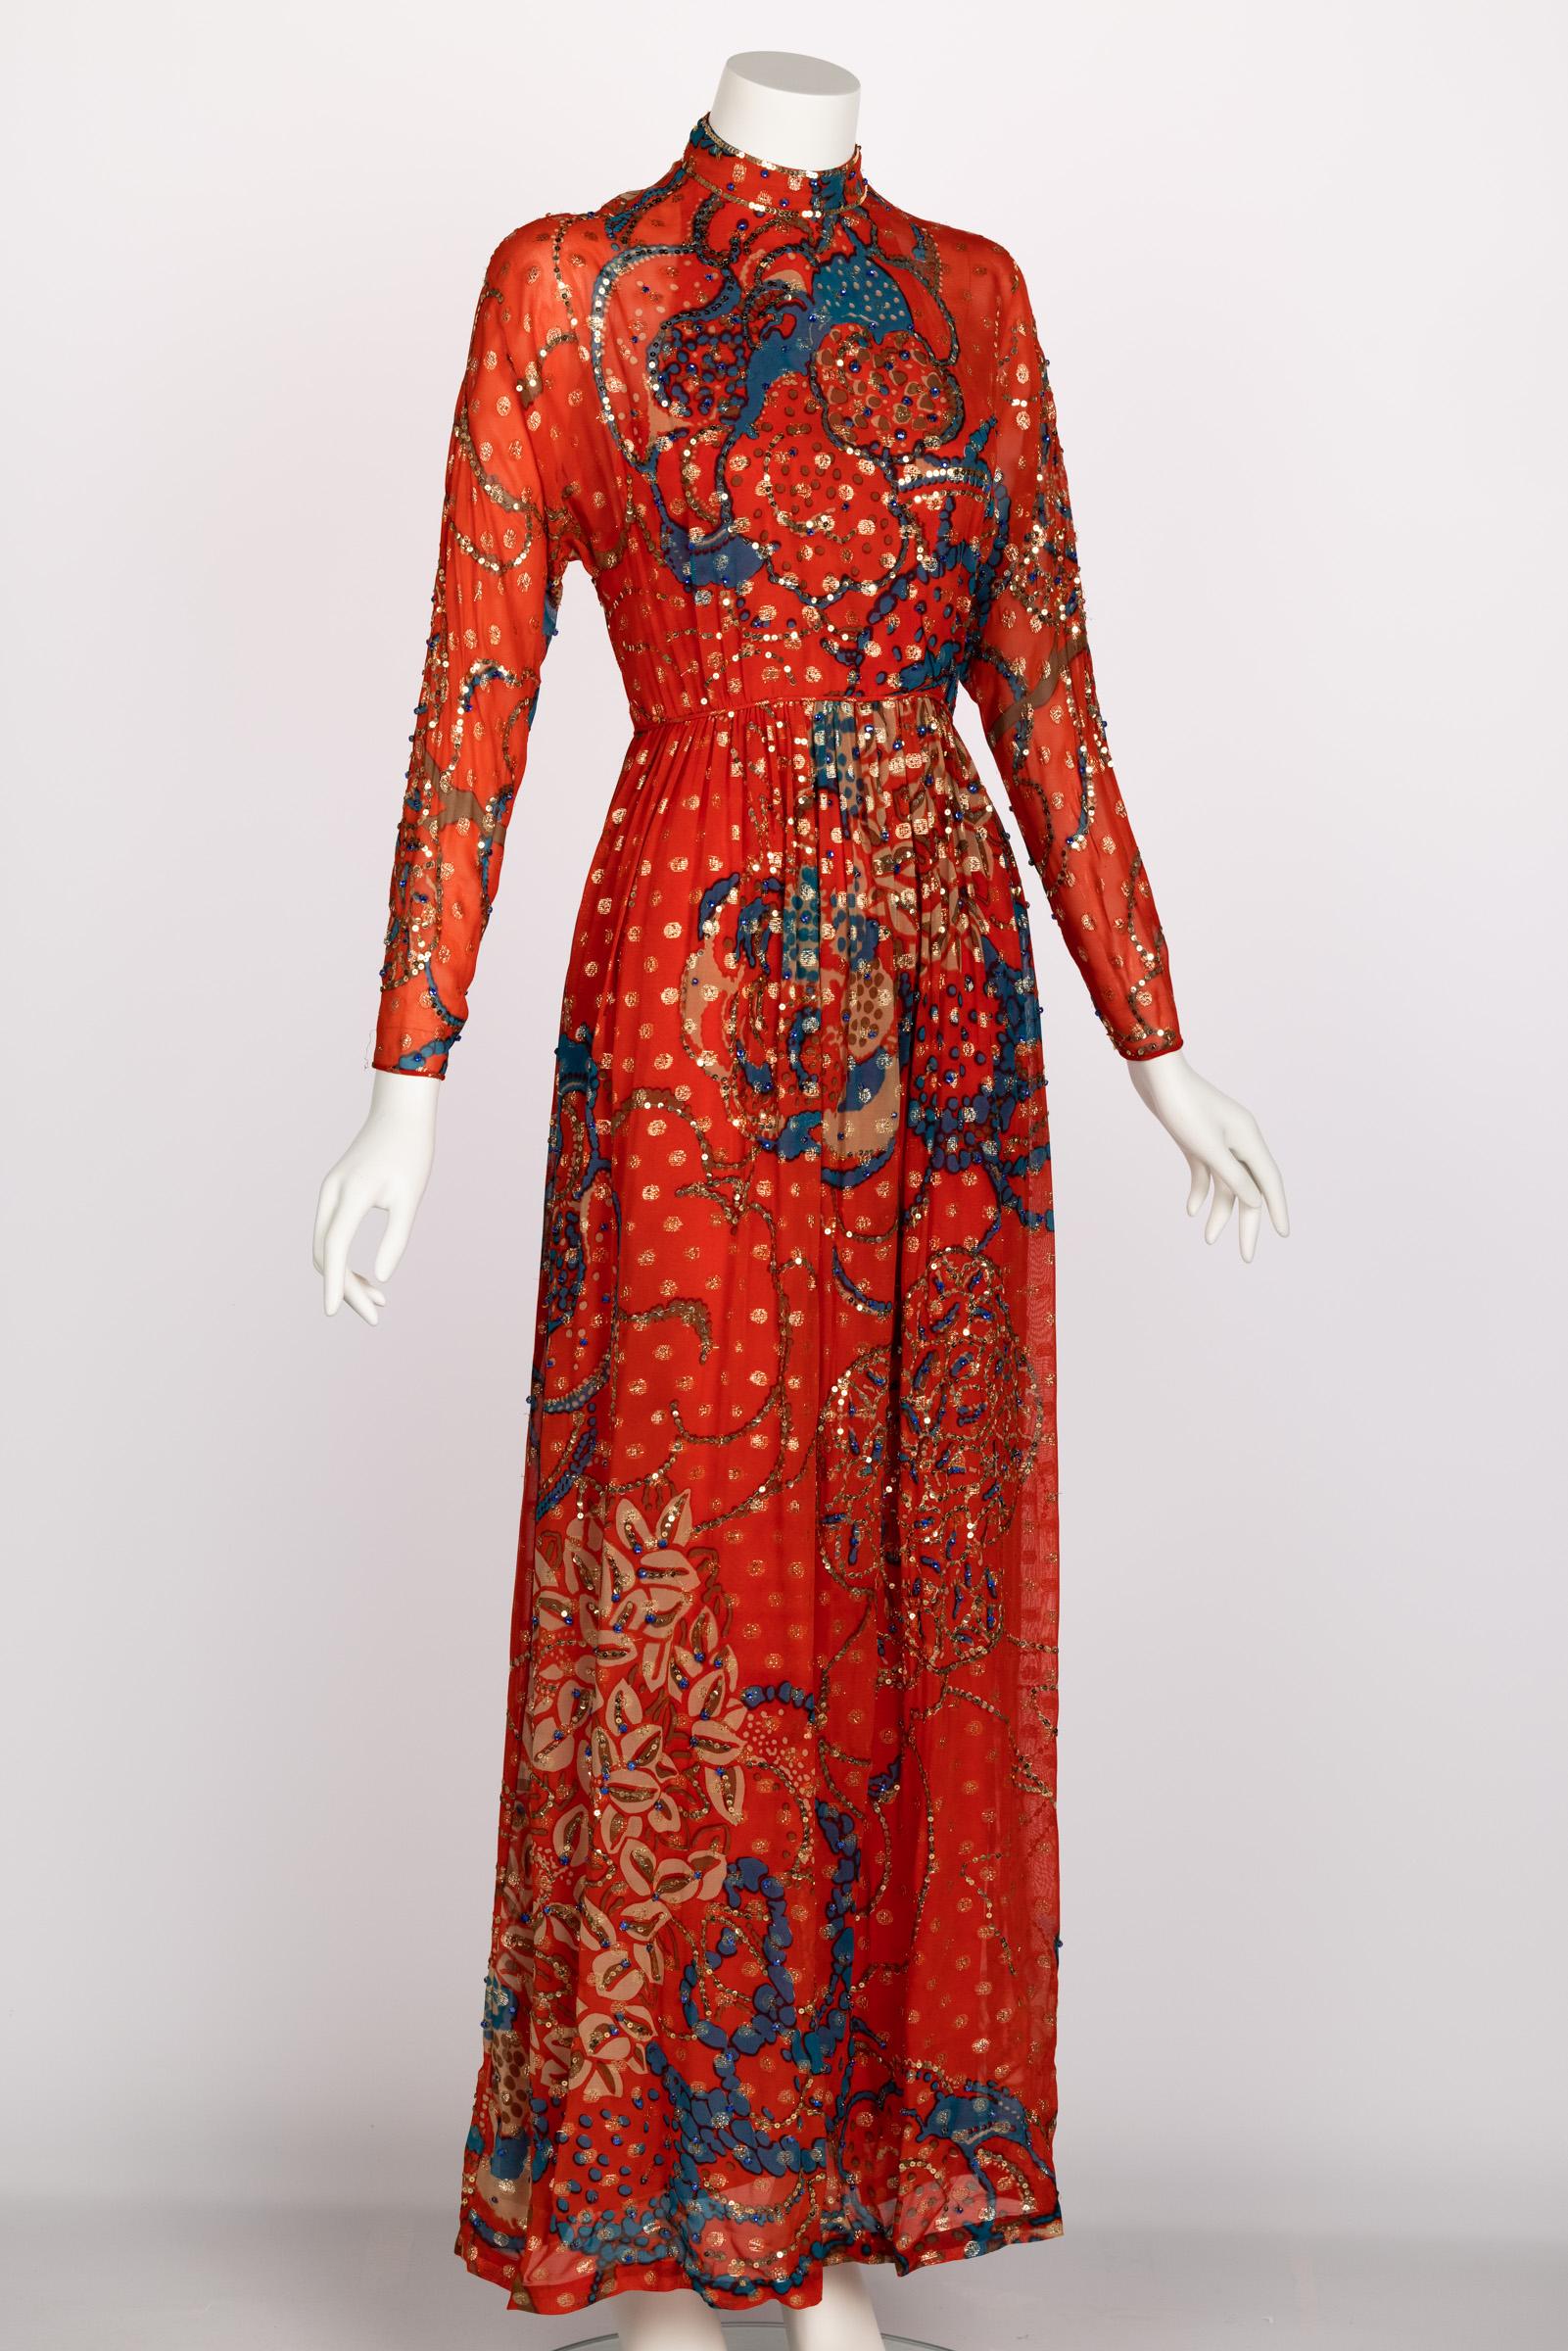 Women's Malcolm Starr Rizkallah Sequined Gold Beaded Red Maxi Dress 1970s For Sale